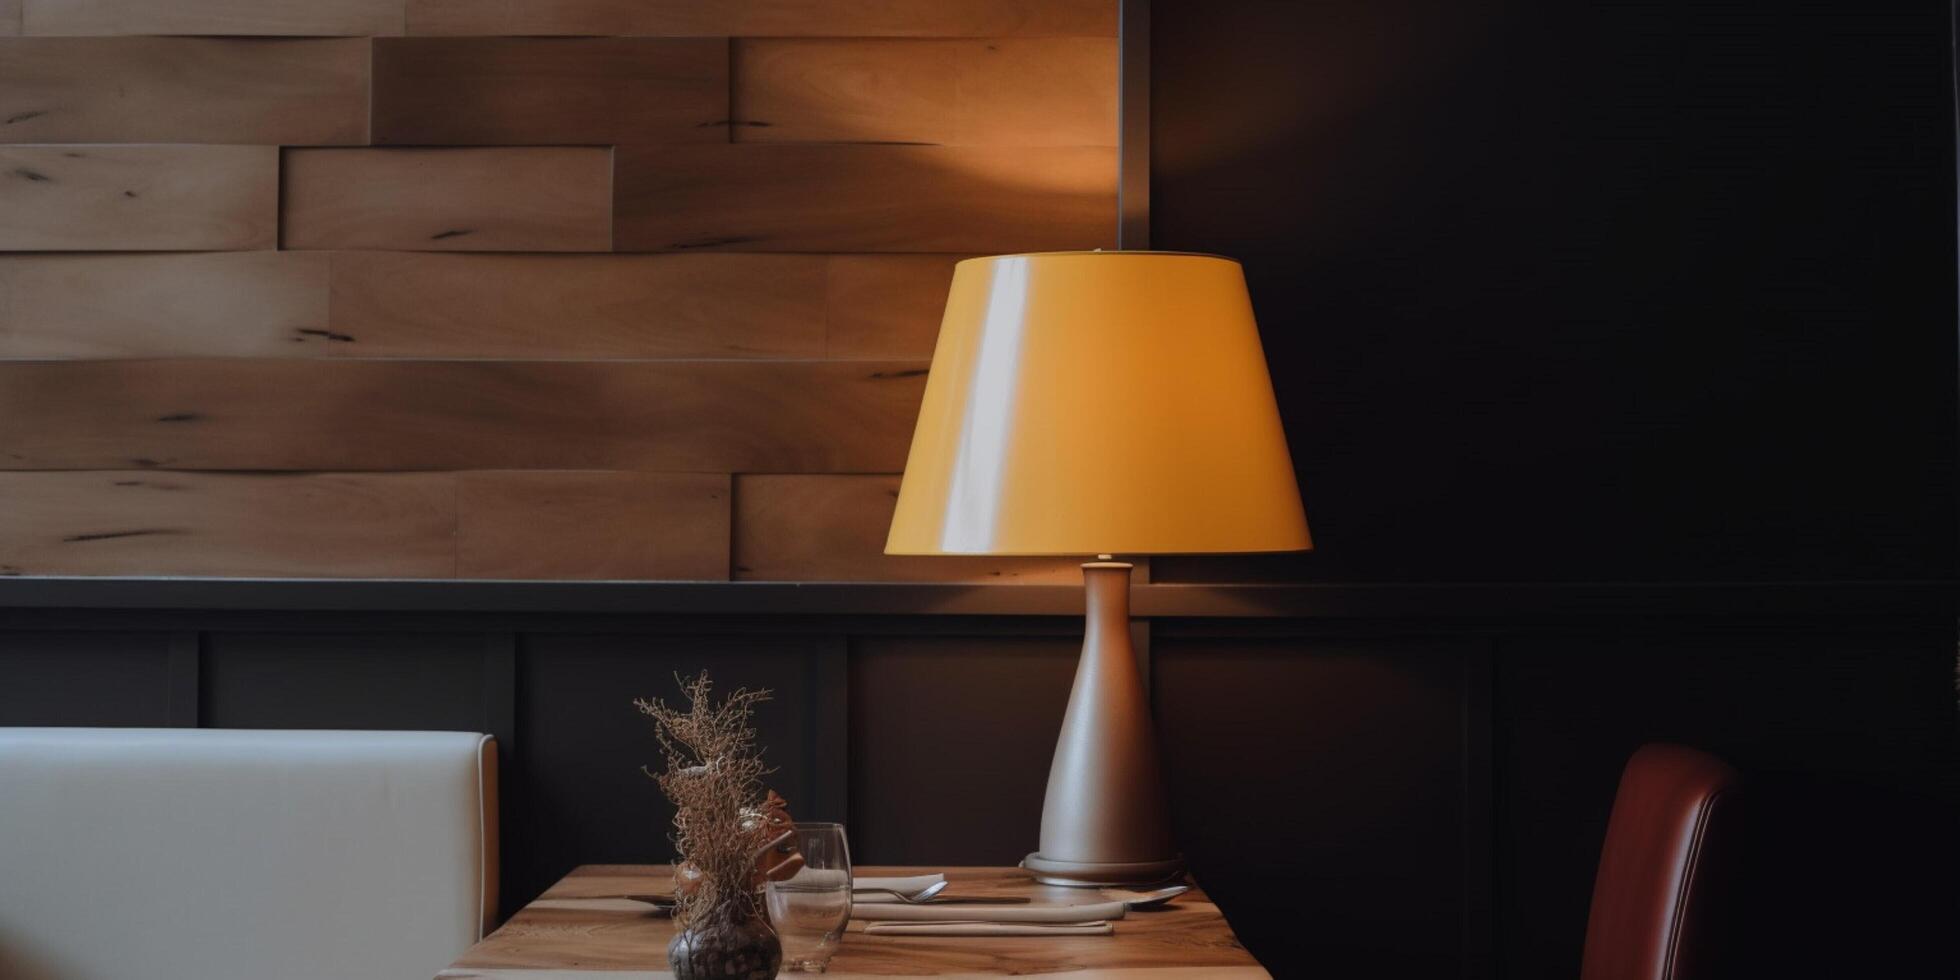 Wooden table in resturant with lamp photo